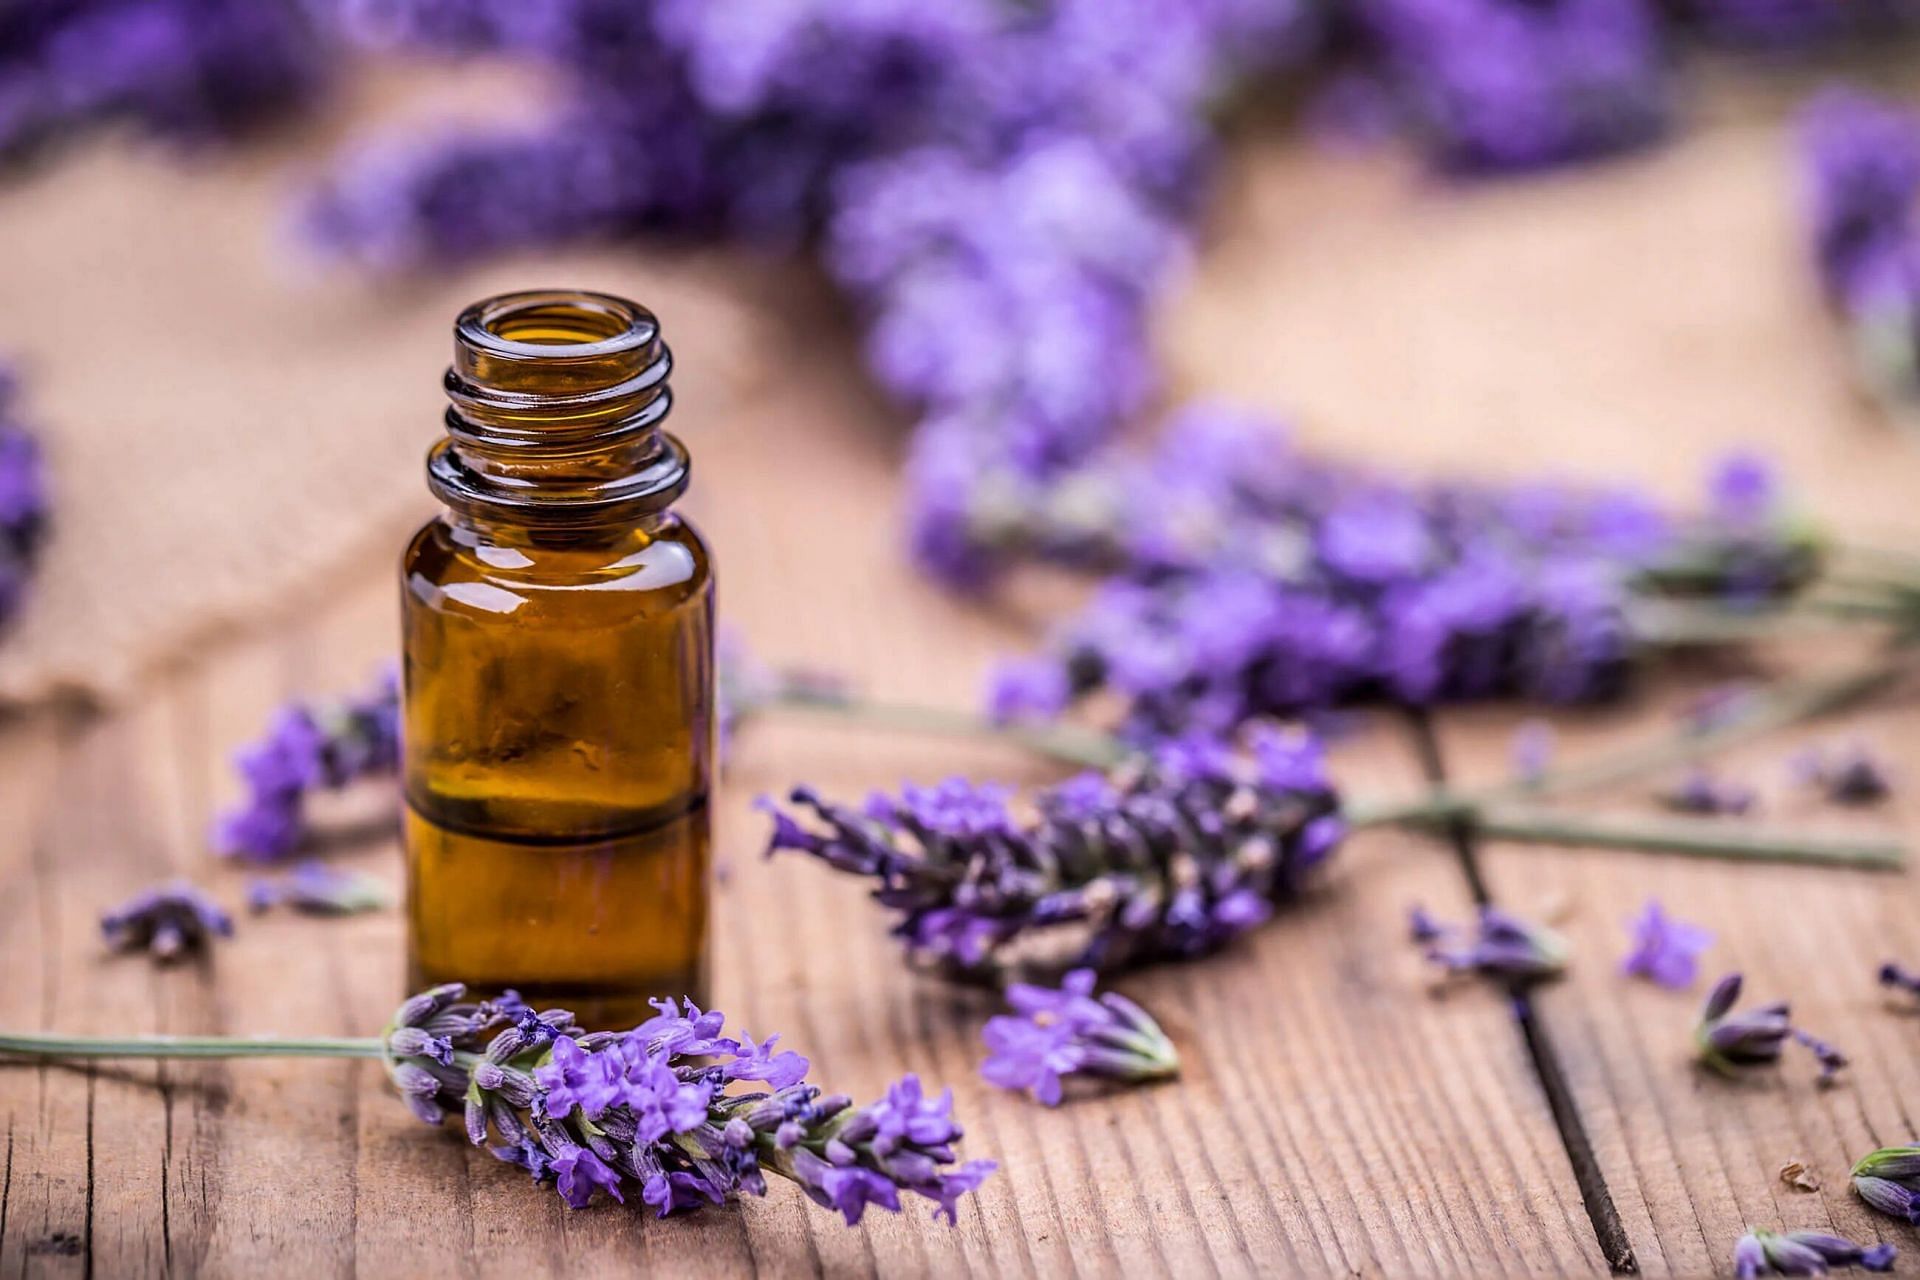 Top 5 health benefits of Lavender oil